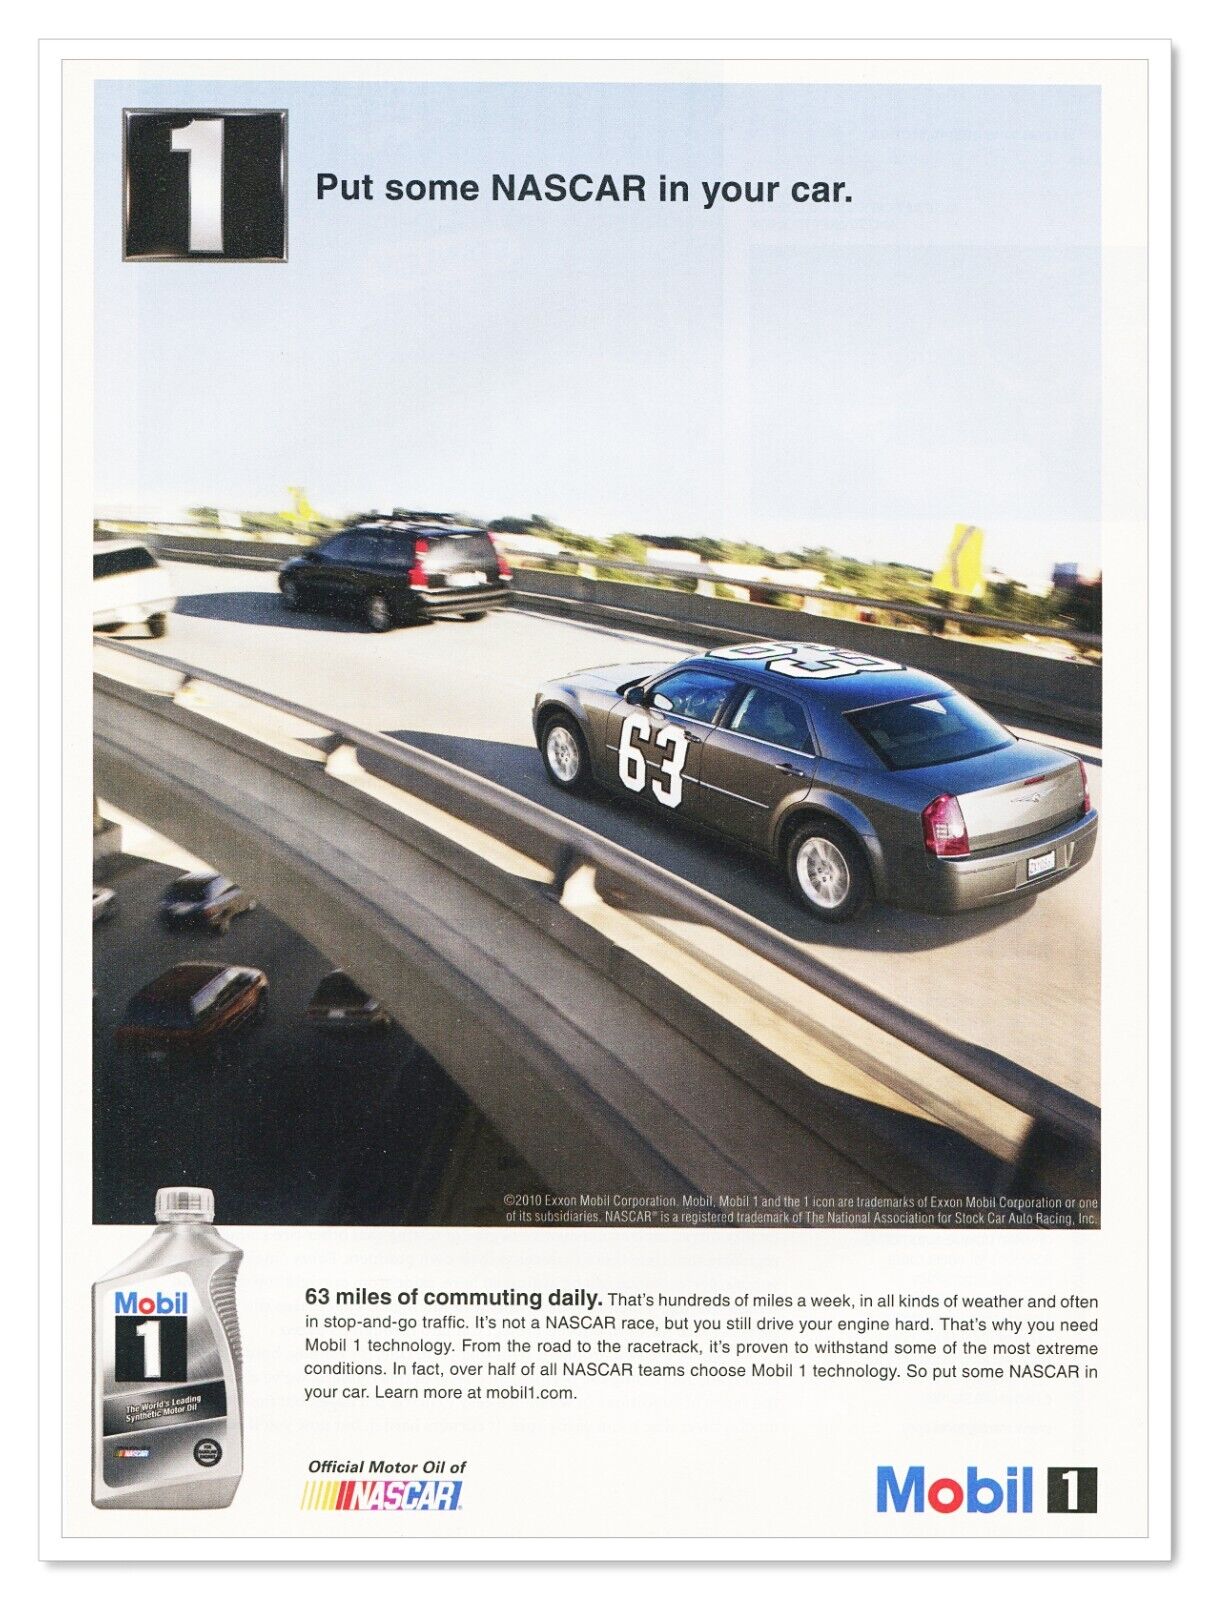 Mobil 1 Motor Oil Put Some NASCAR in Your Car 2010 Full-Page Print Magazine Ad